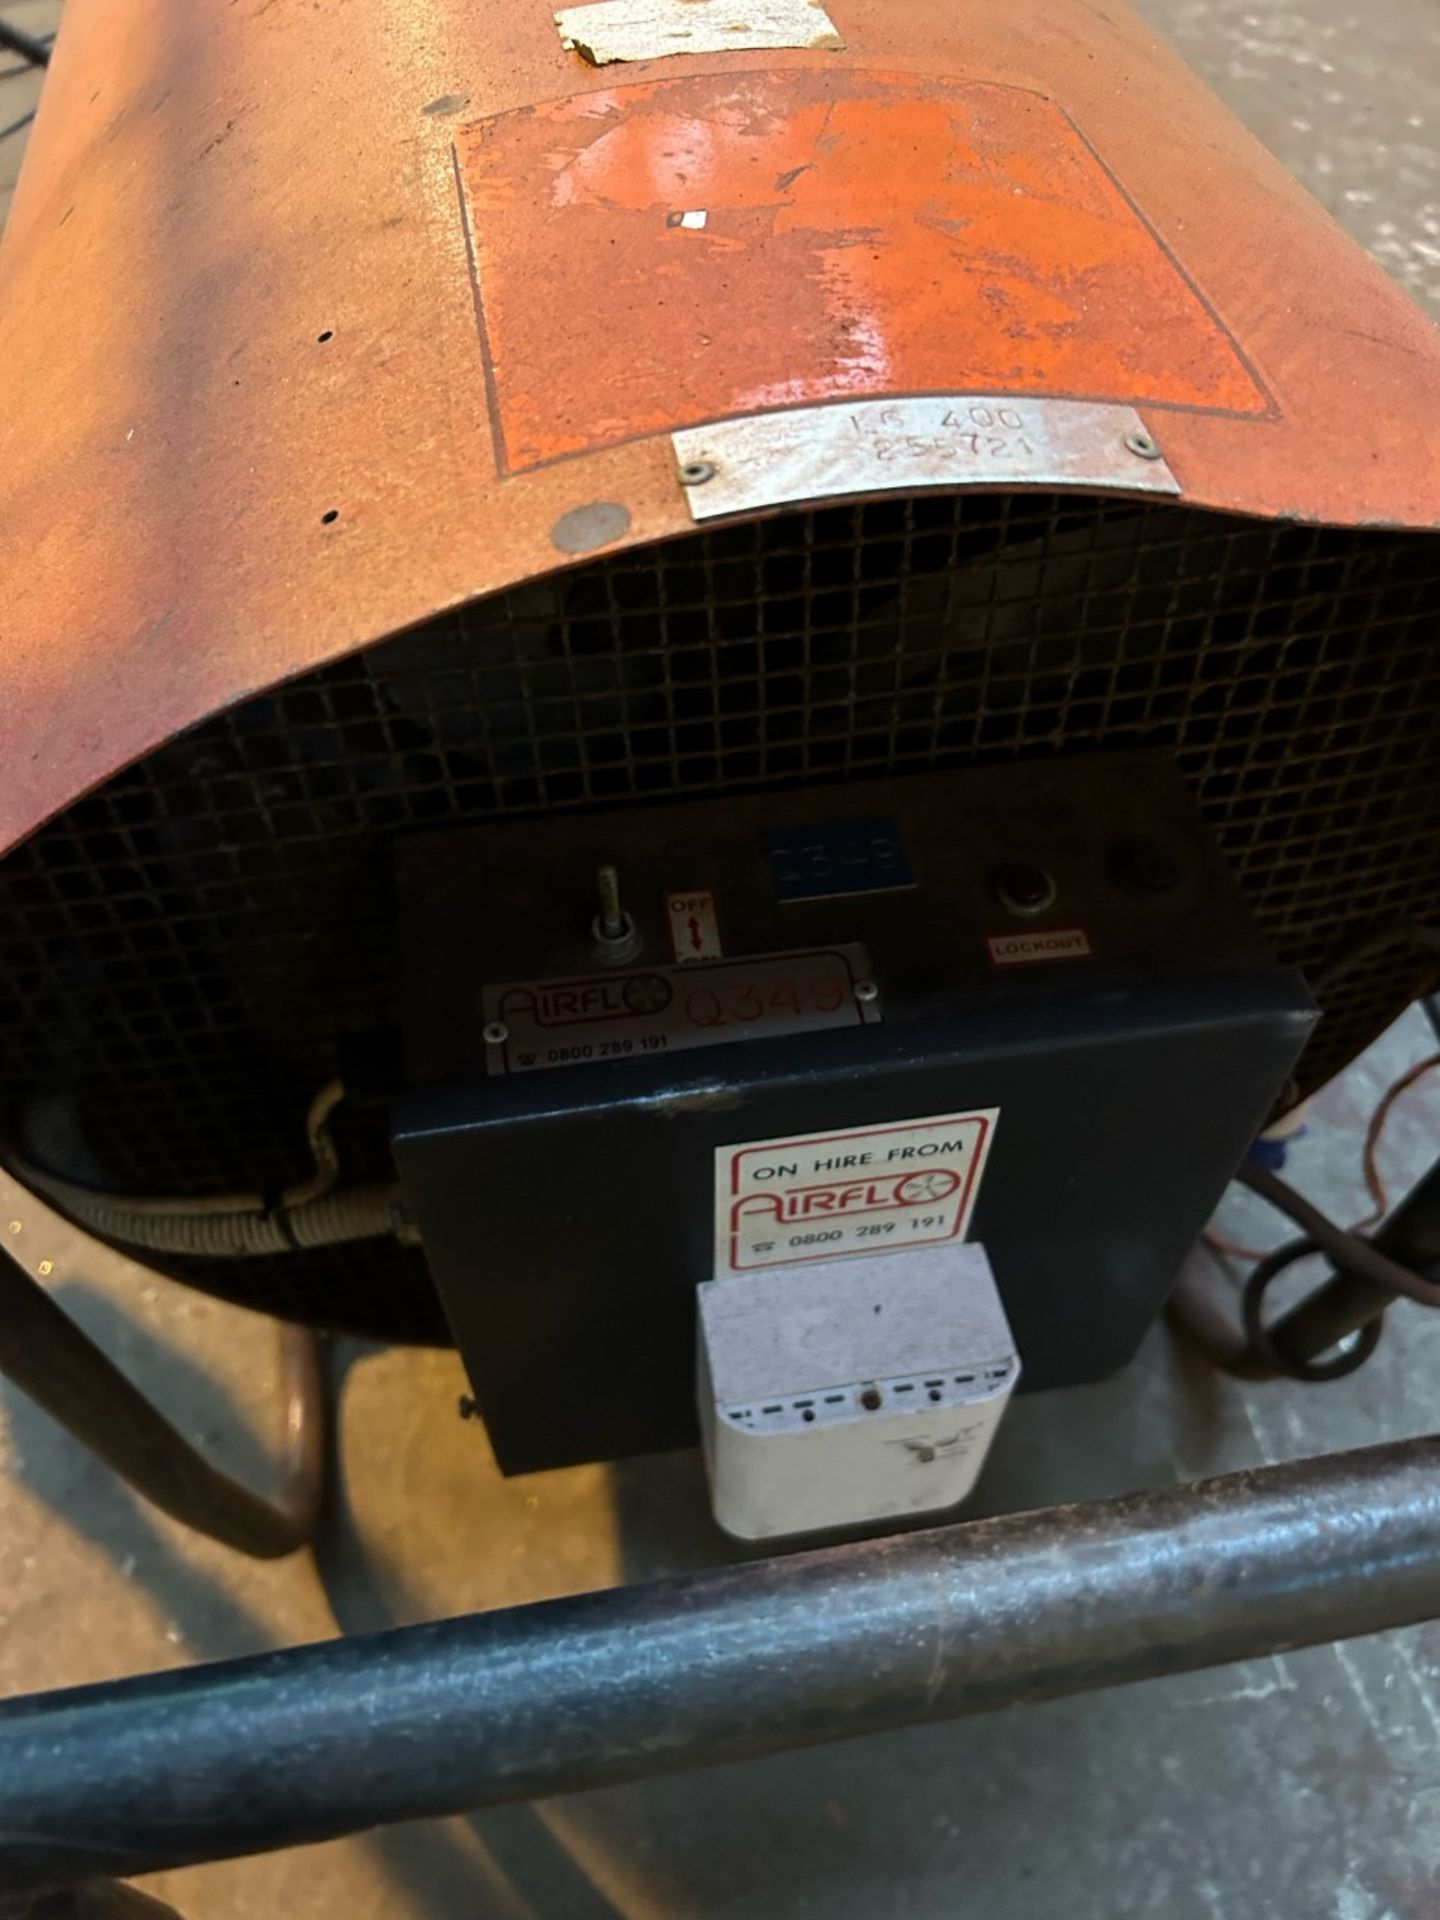 Big 240v jetaire space heater. Good condition - Image 2 of 4